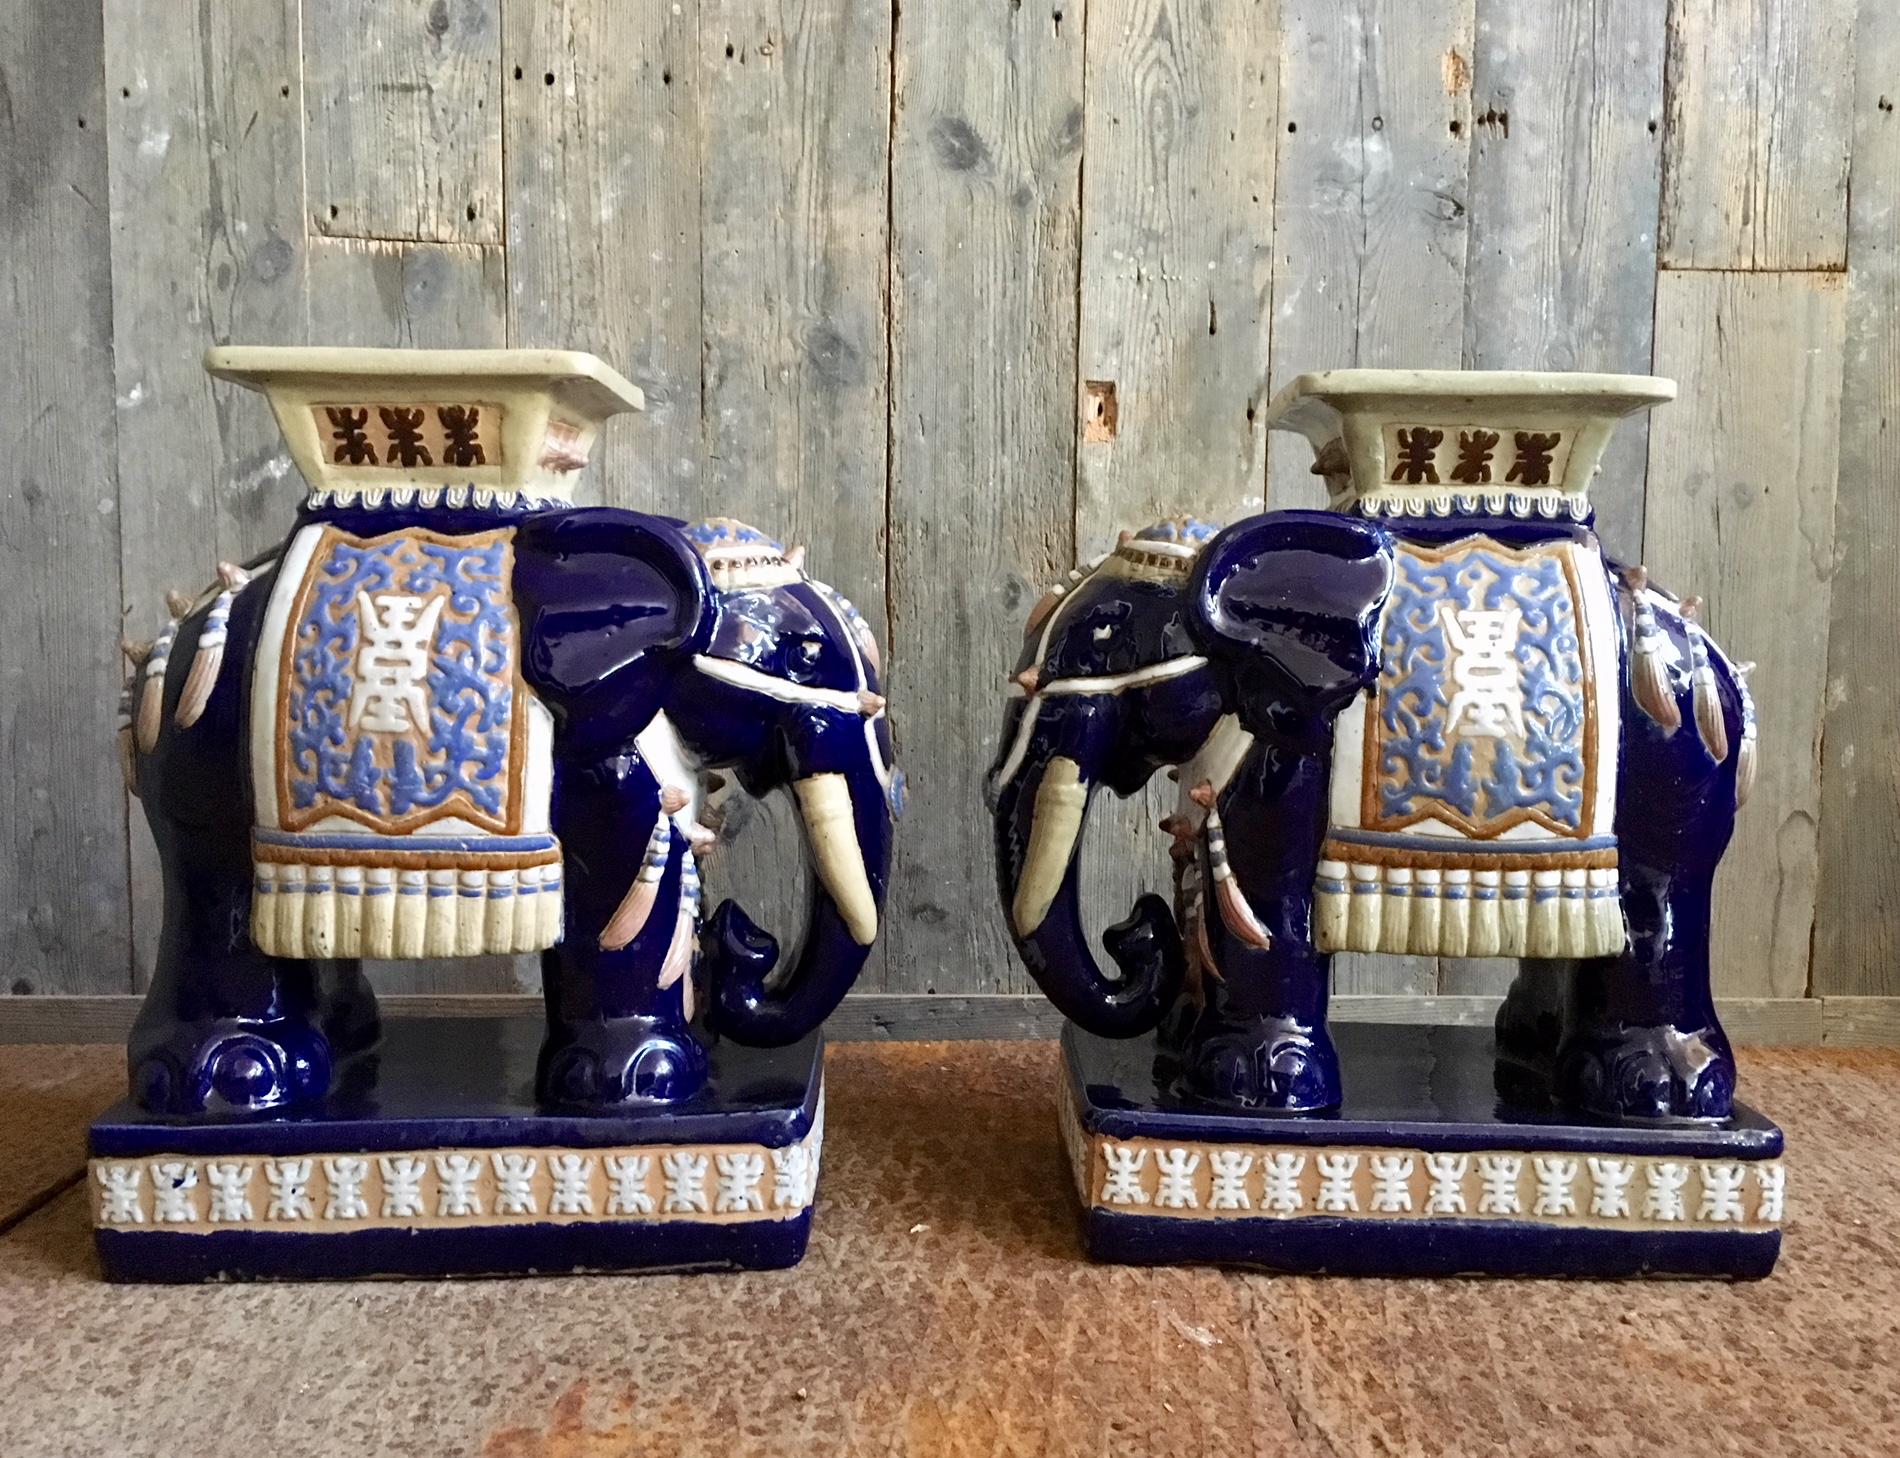 Pair of ceramic oriental elephant stools or drinking tables from the 1970s. Very decorative and detailed. In Hollywood Regency style. Measures: 20 cm in depth, 53 cm in height and 47 cm in width.